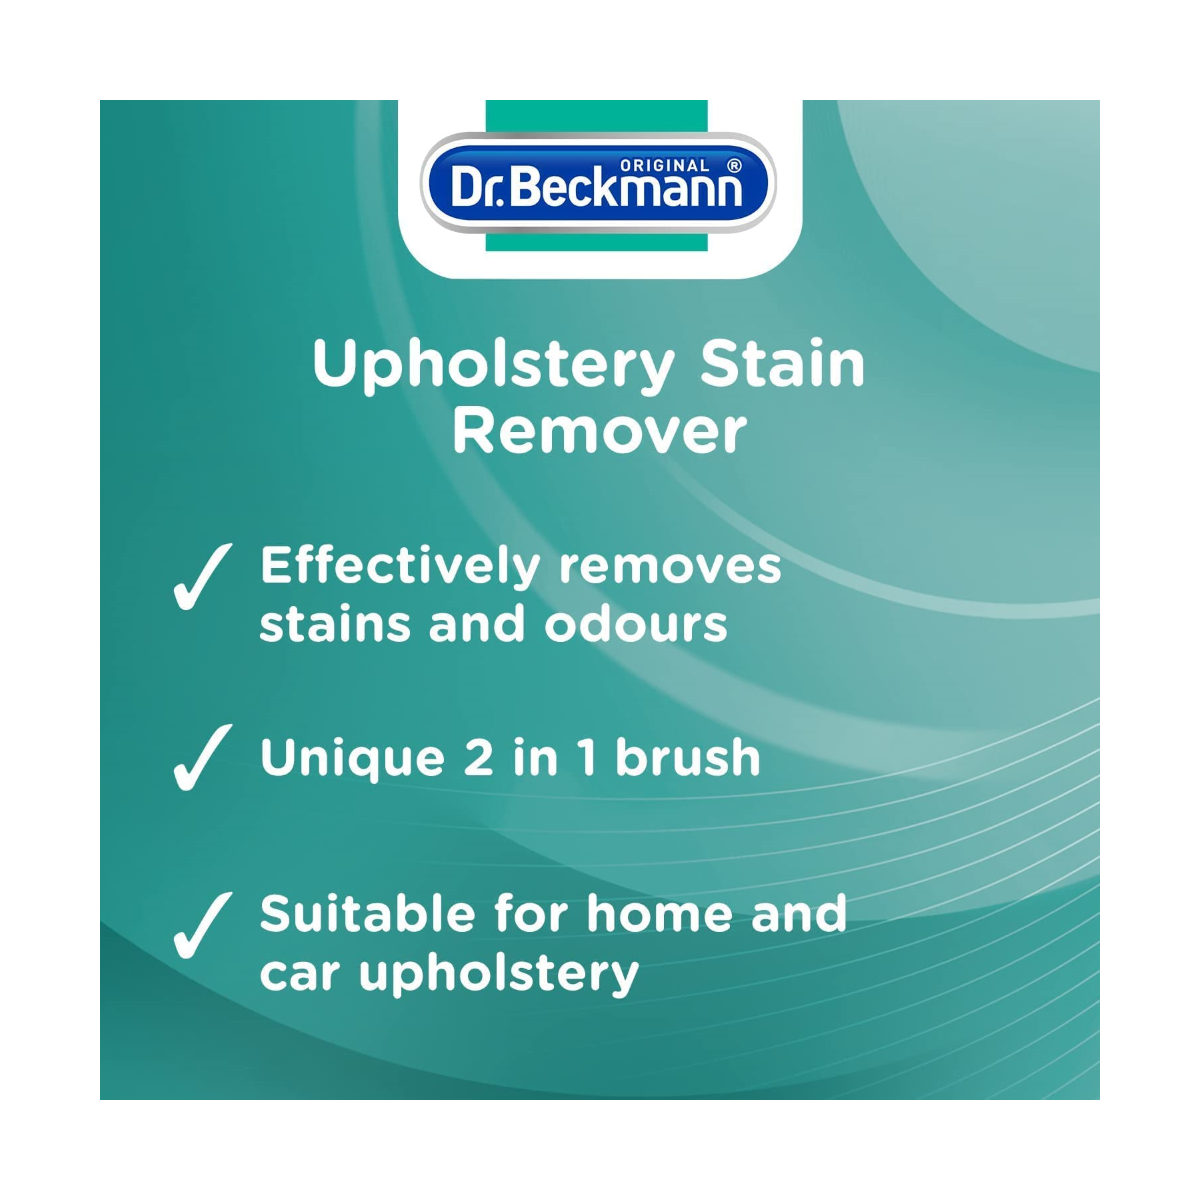 Dr. Beckmann Upholstery Stain Remover 4